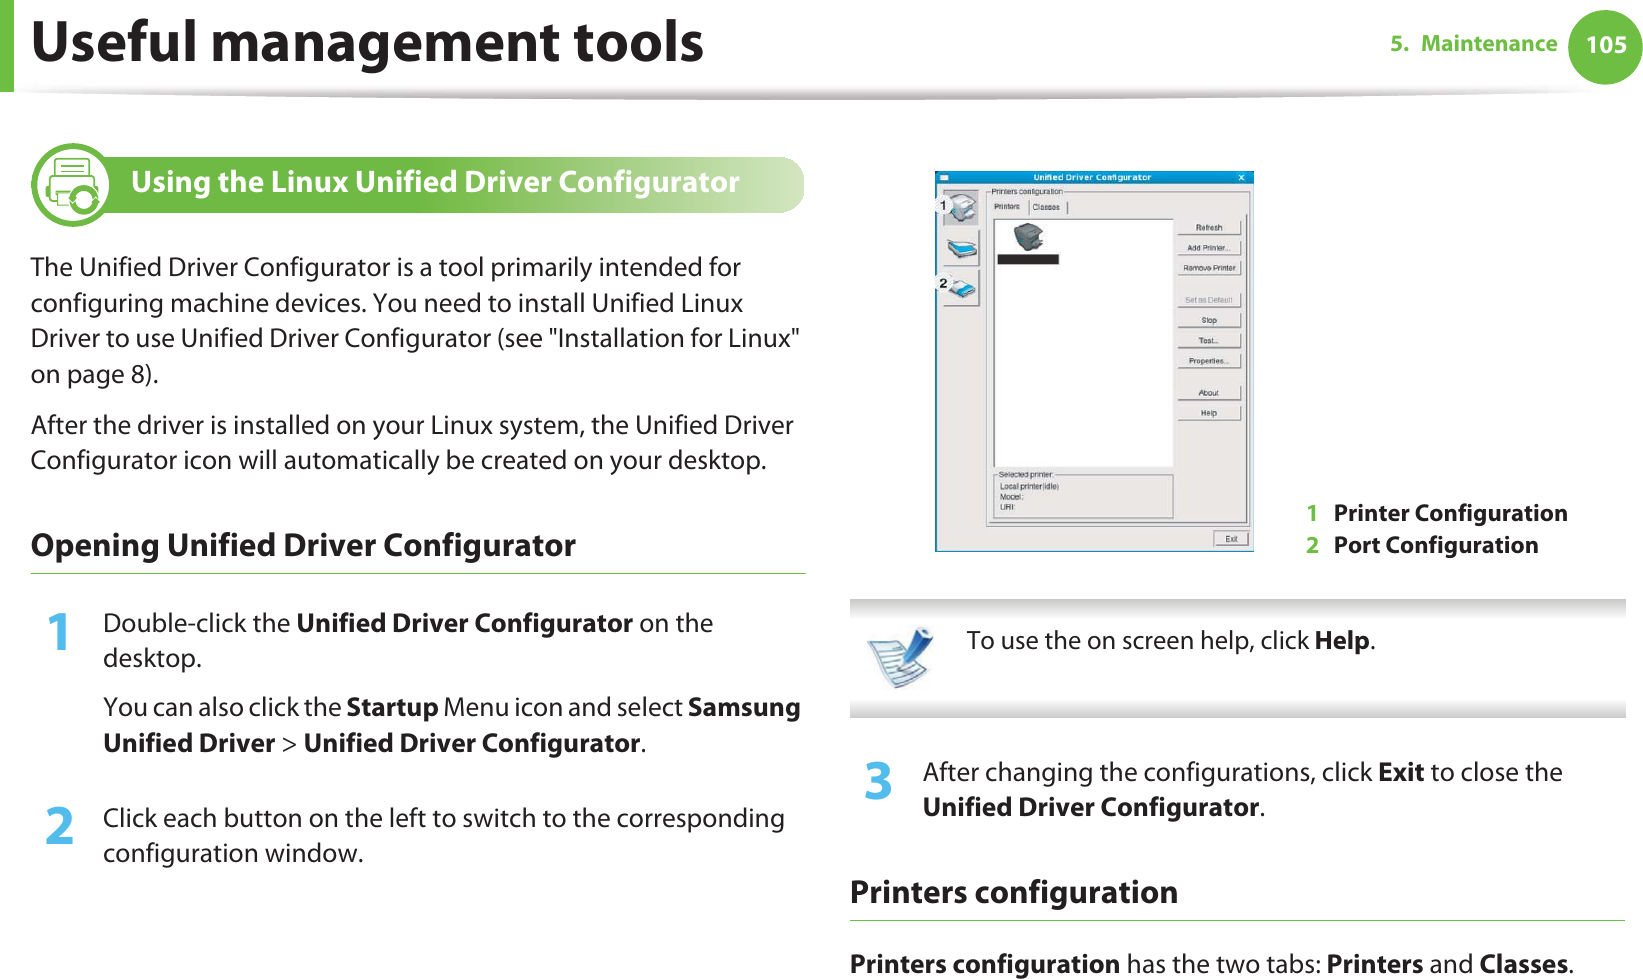 Useful management tools 1055. Maintenance10 Using the Linux Unified Driver ConfiguratorThe Unified Driver Configurator is a tool primarily intended for configuring machine devices. You need to install Unified Linux Driver to use Unified Driver Configurator (see &quot;Installation for Linux&quot; on page 8).After the driver is installed on your Linux system, the Unified Driver Configurator icon will automatically be created on your desktop.Opening Unified Driver Configurator1Double-click the Unified Driver Configurator on the desktop.You can also click the Startup Menu icon and select Samsung Unified Driver &gt; Unified Driver Configurator.2  Click each button on the left to switch to the corresponding configuration window.  To use the on screen help, click Help. 3  After changing the configurations, click Exit to close the Unified Driver Configurator.Printers configurationPrinters configuration has the two tabs: Printers and Classes.1Printer Configuration 2Port Configuration 